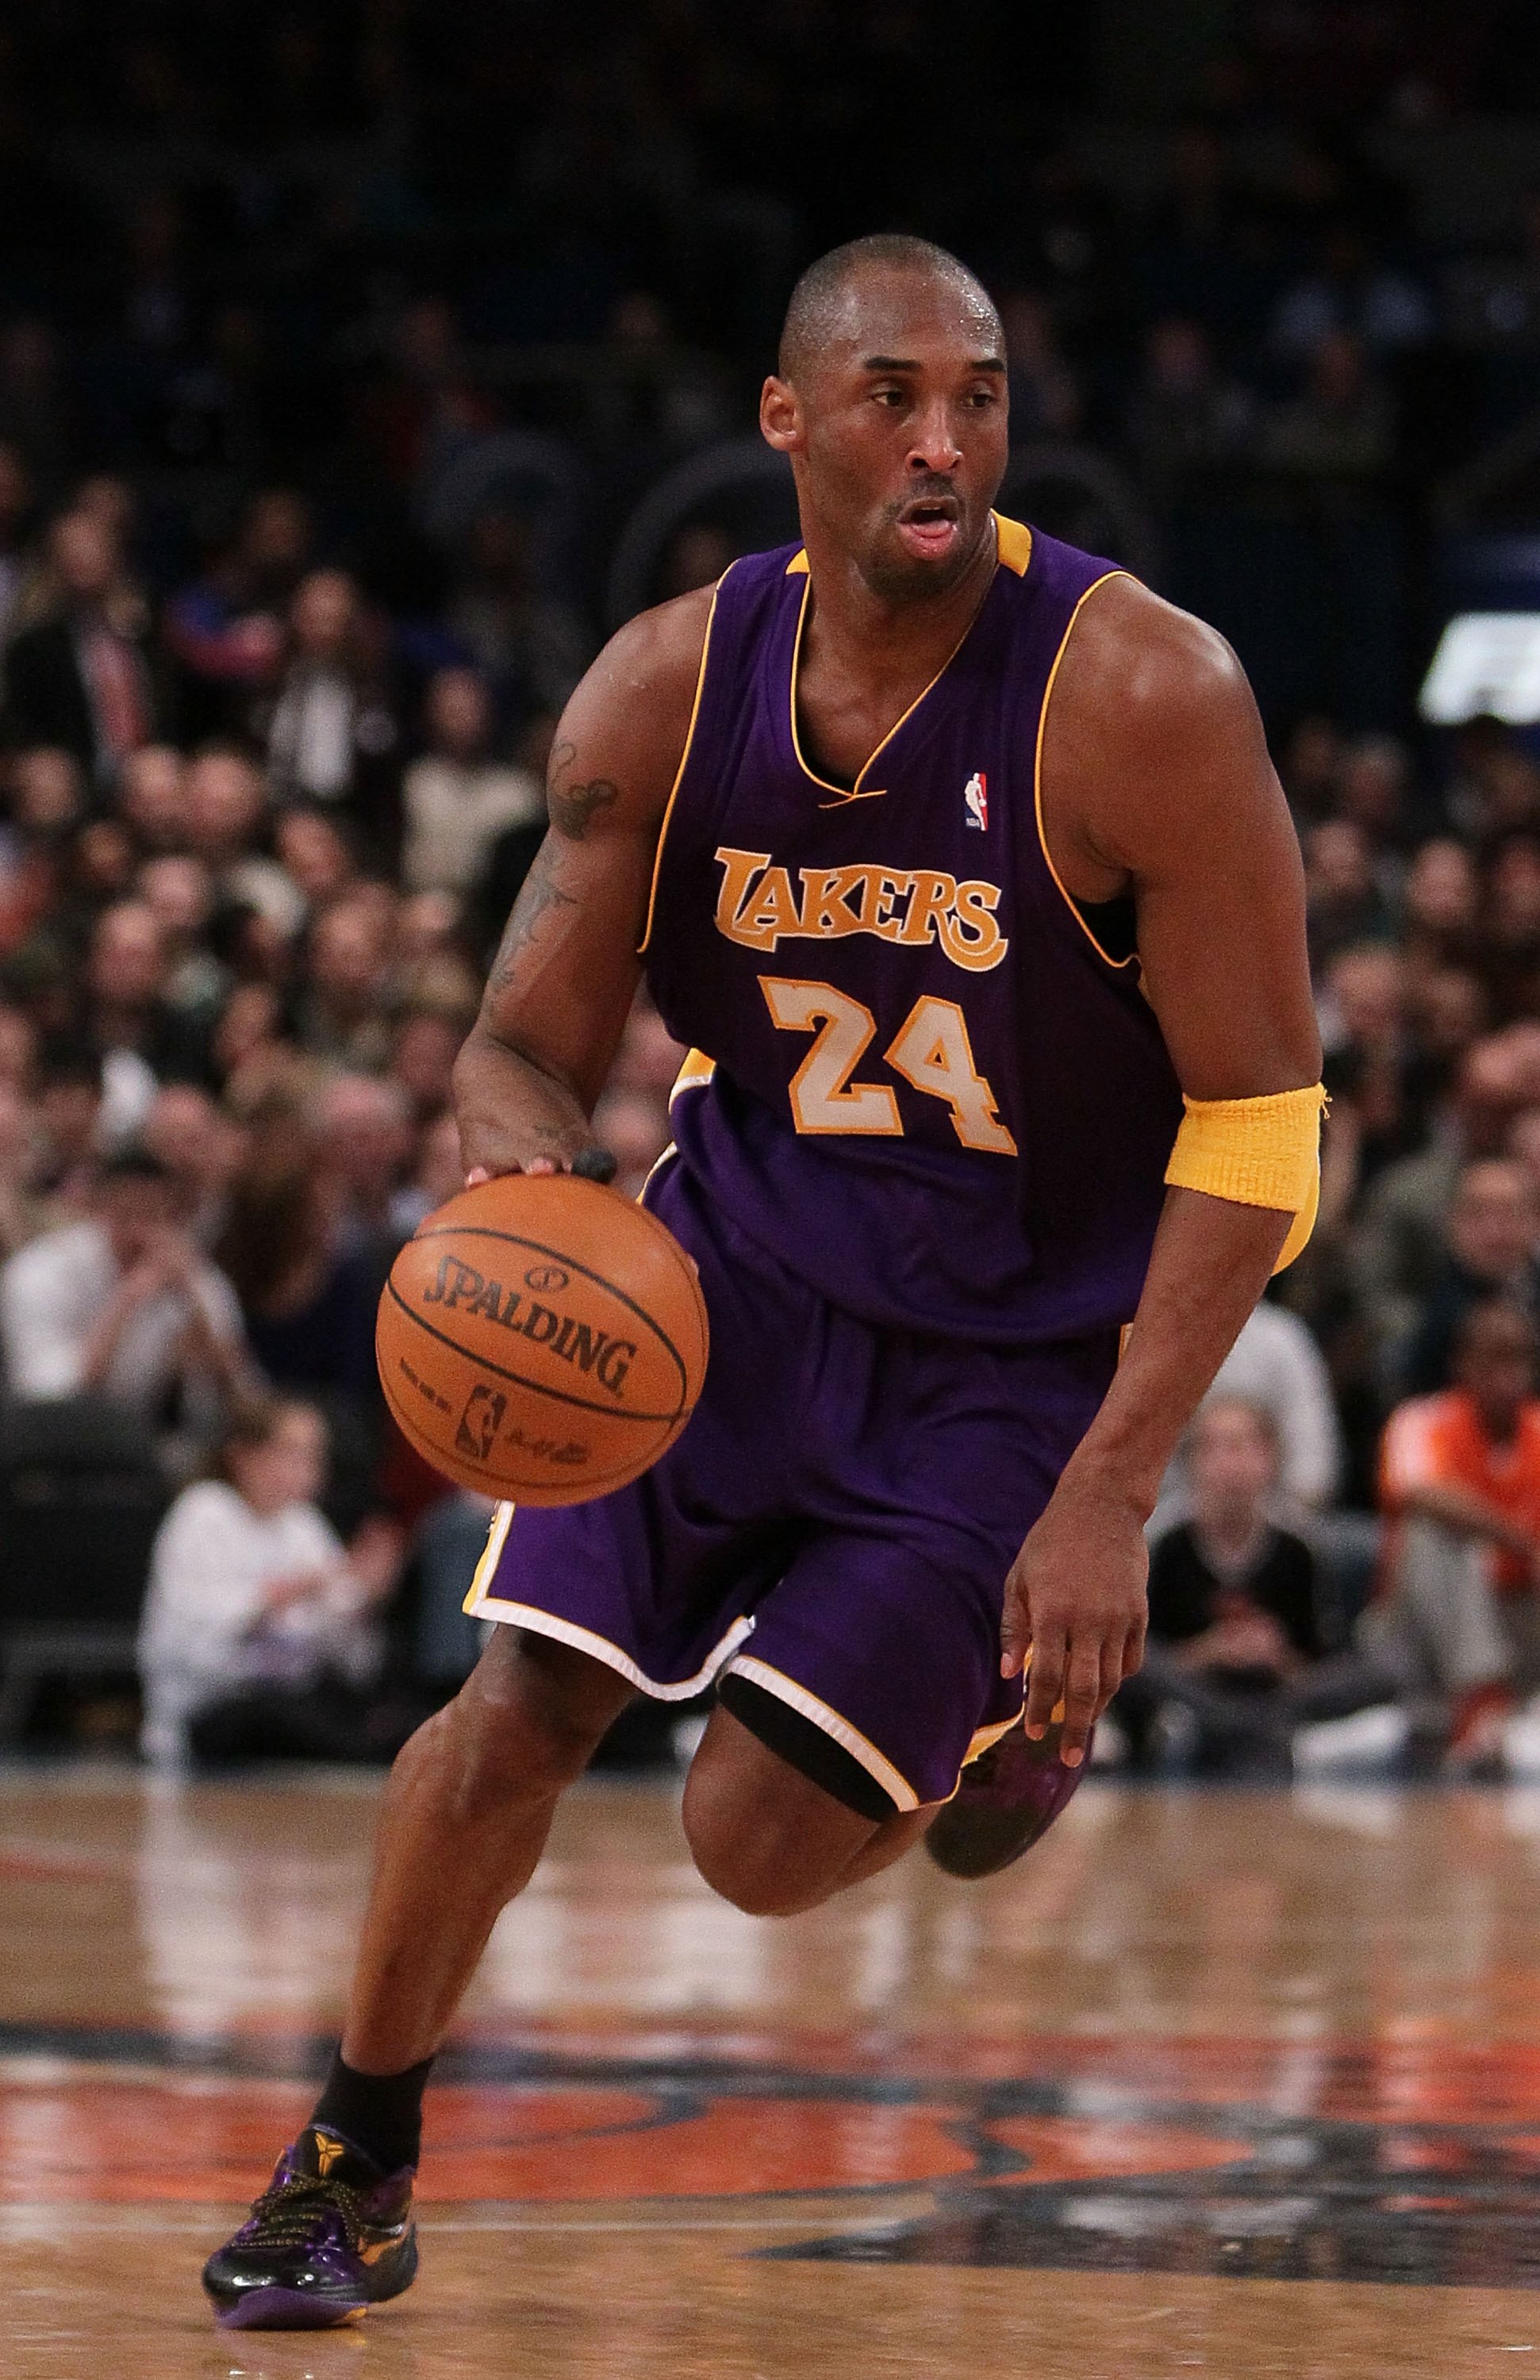 NEW YORK - JANUARY 22:  Kobe Bryant #24 of the Los Angeles Lakers in action against the New York Knicks during their game at Madison Square Garden on January 22, 2010 in New York, New York.  NOTE TO USER: User expressly acknowledges and agrees that, by do